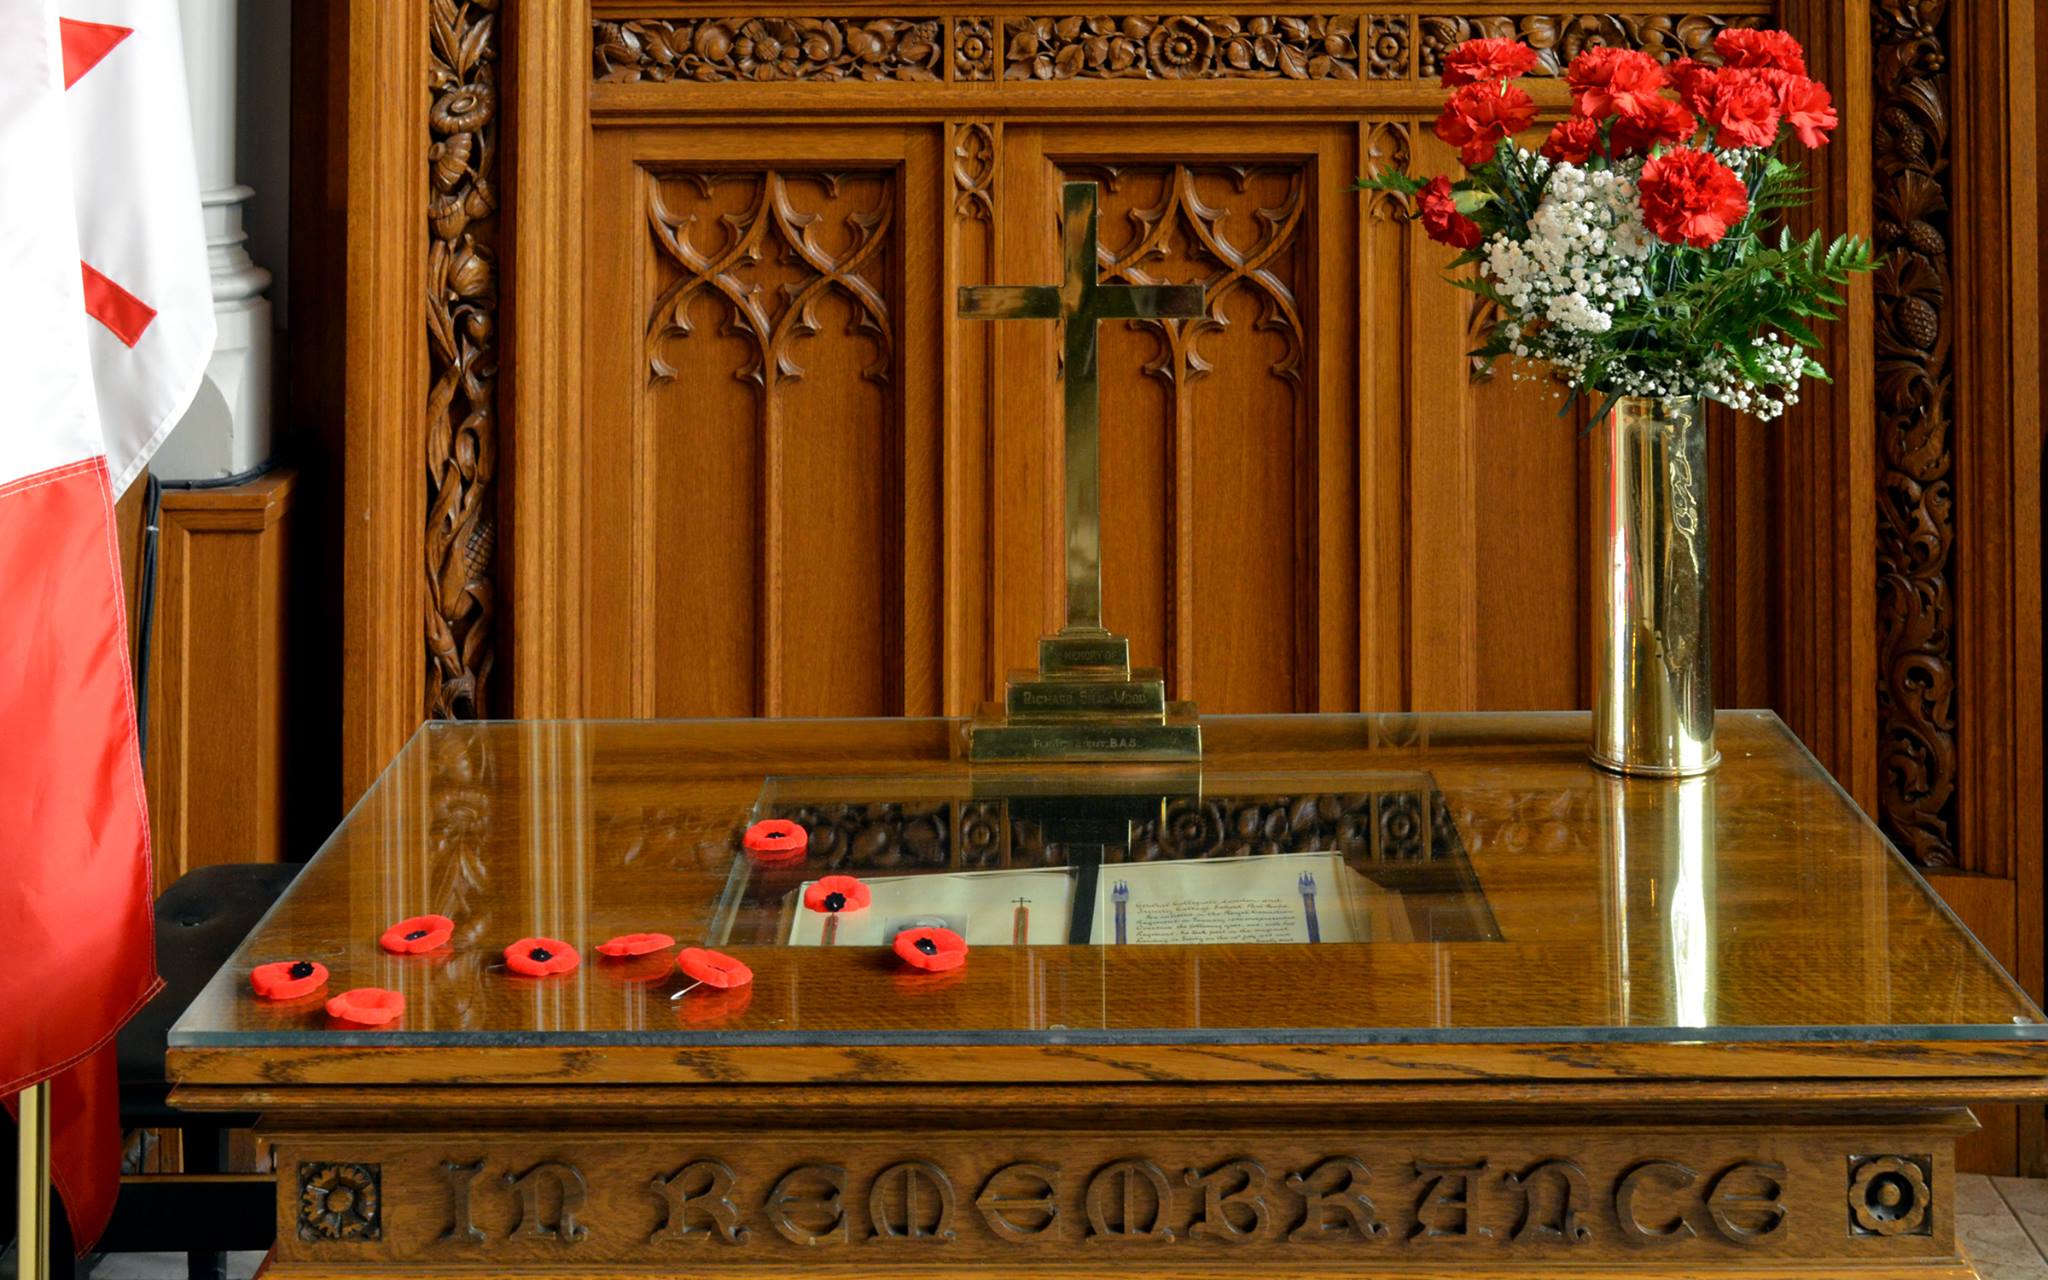 Poppies spread over the In Memoriam Table